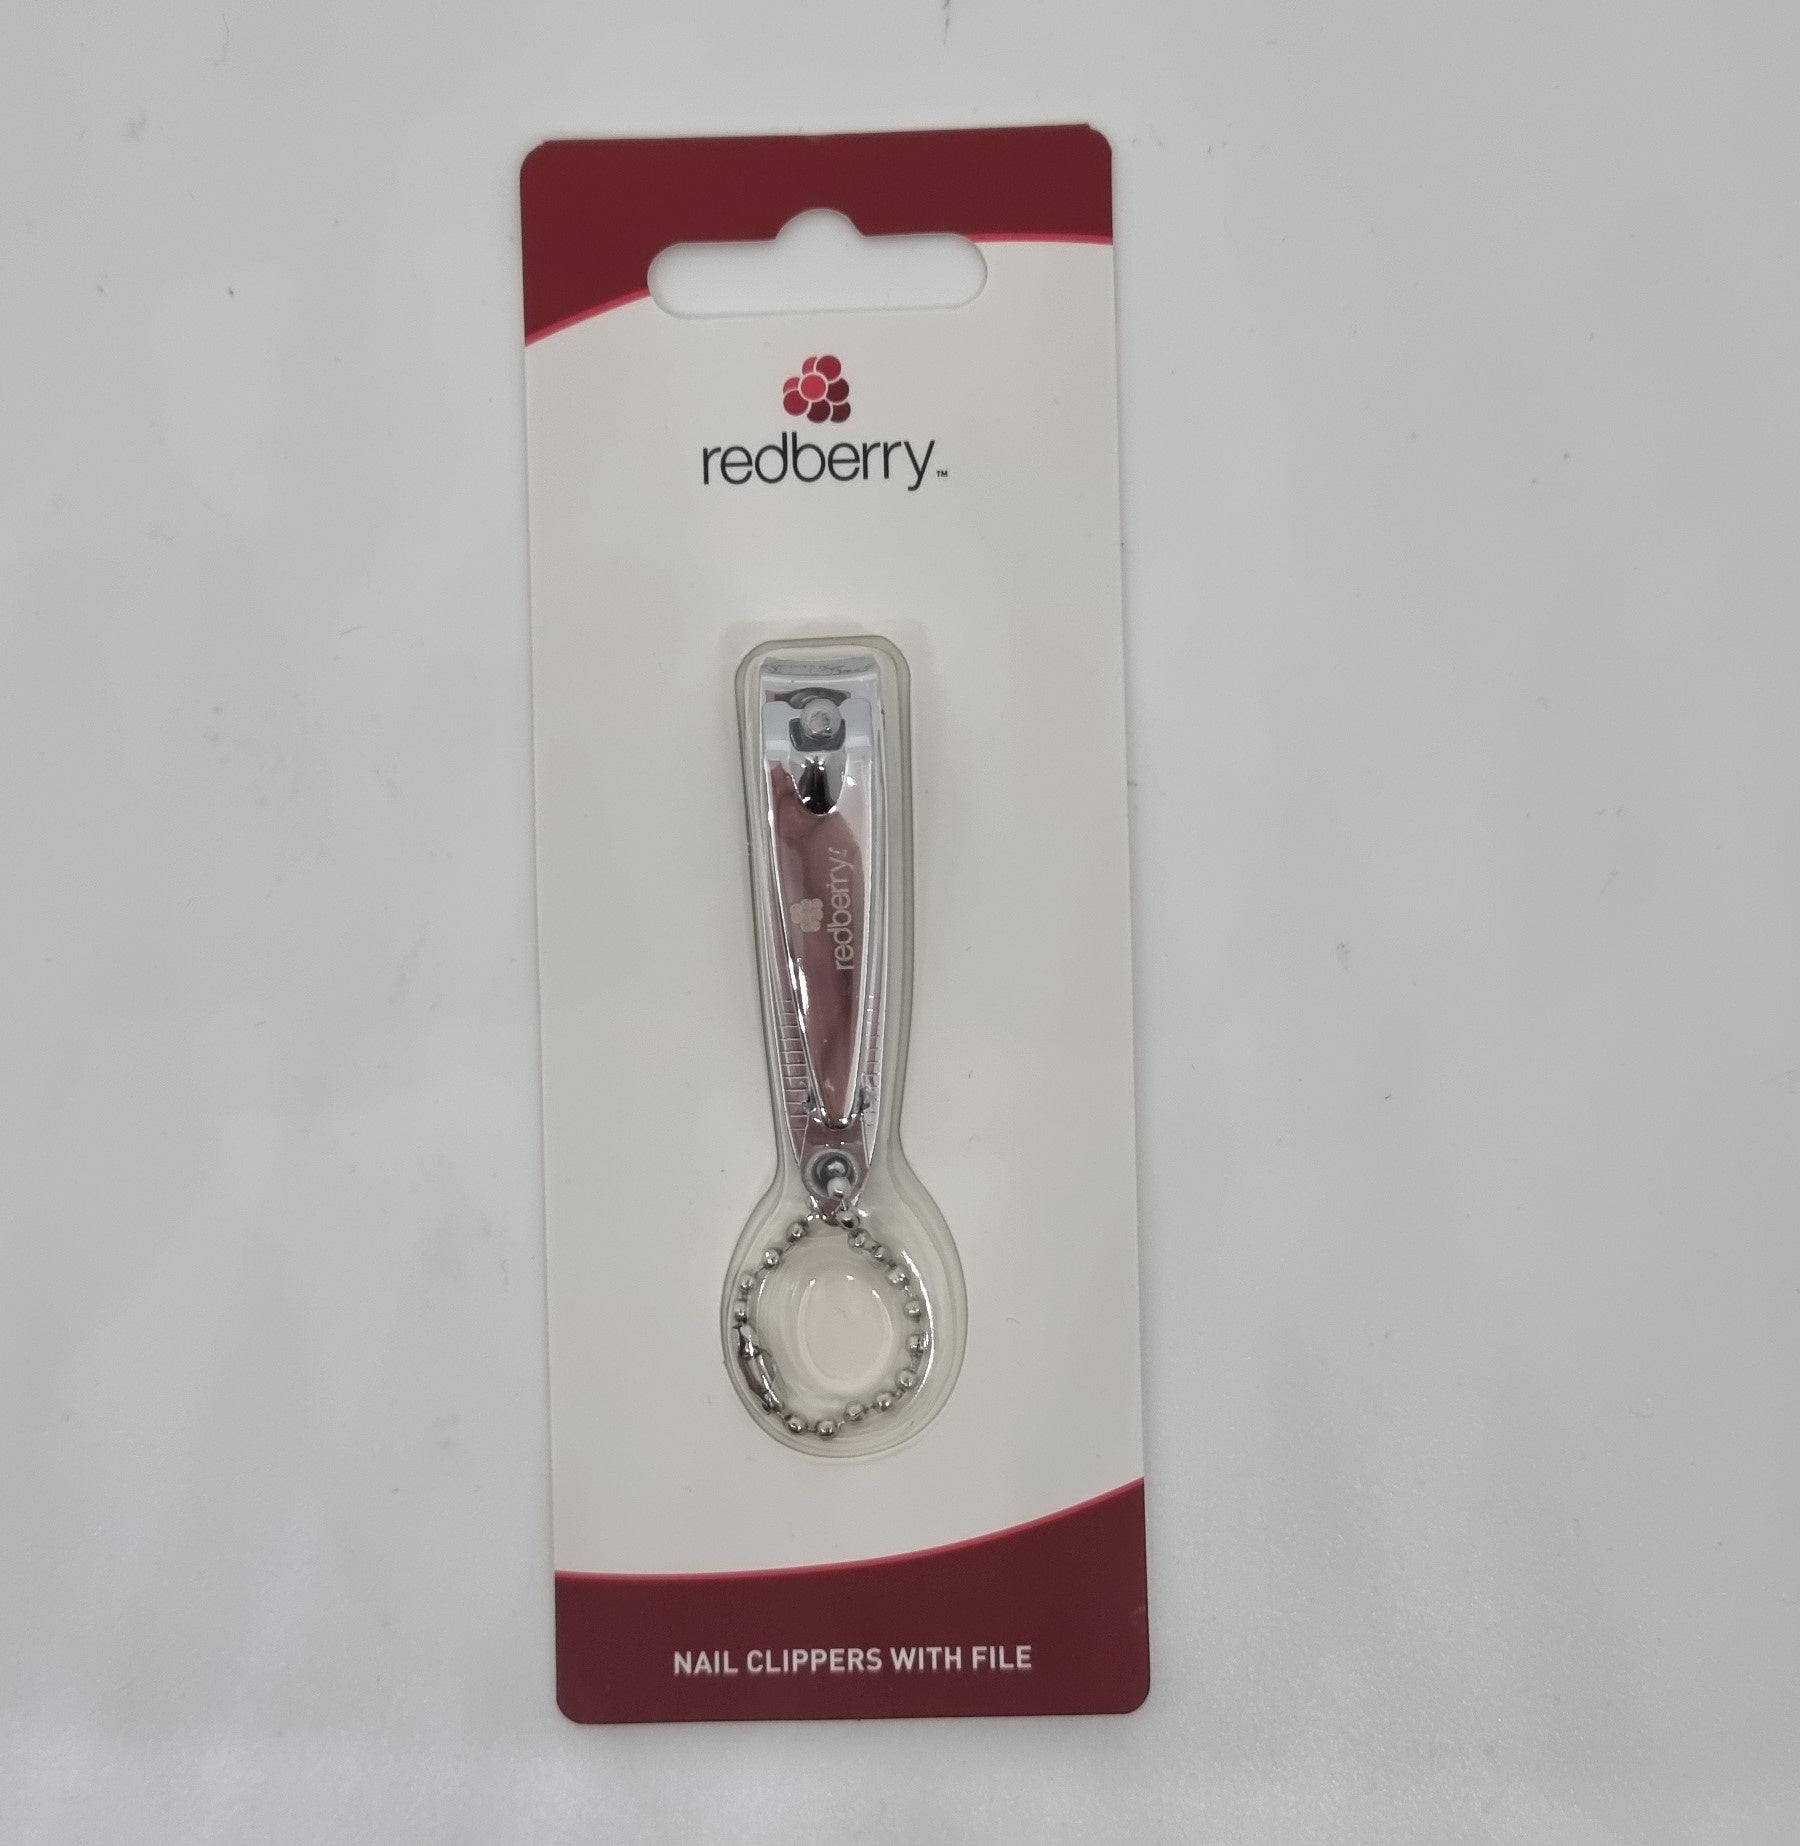 Redberry Nail Clippers with File